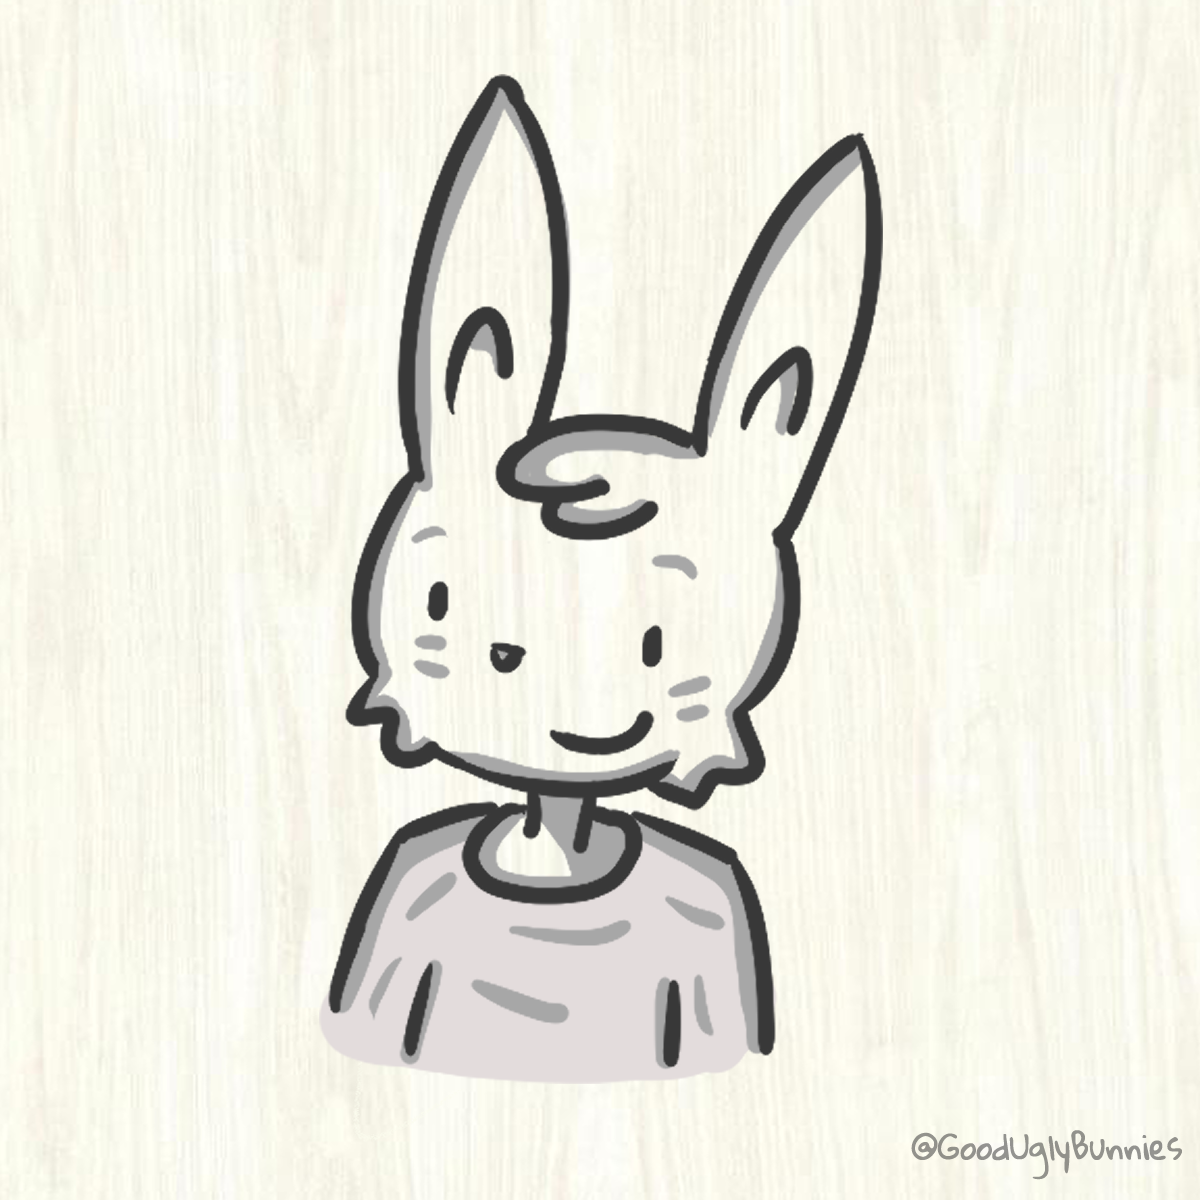 Image of a not so ugly bunny.